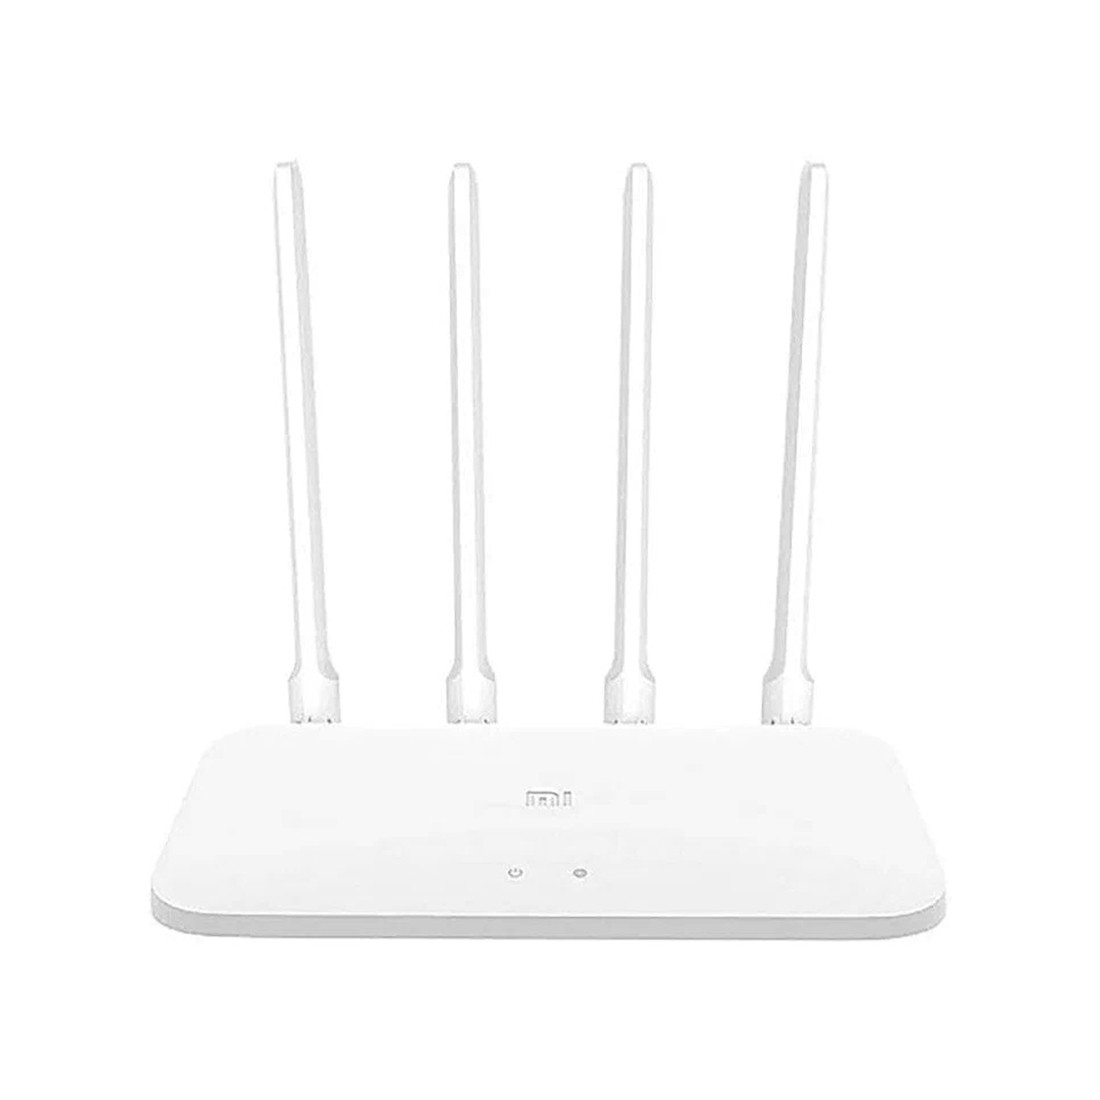 Маршрутизатор Xiaomi Router AC1200 - фото 2 - id-p104497600